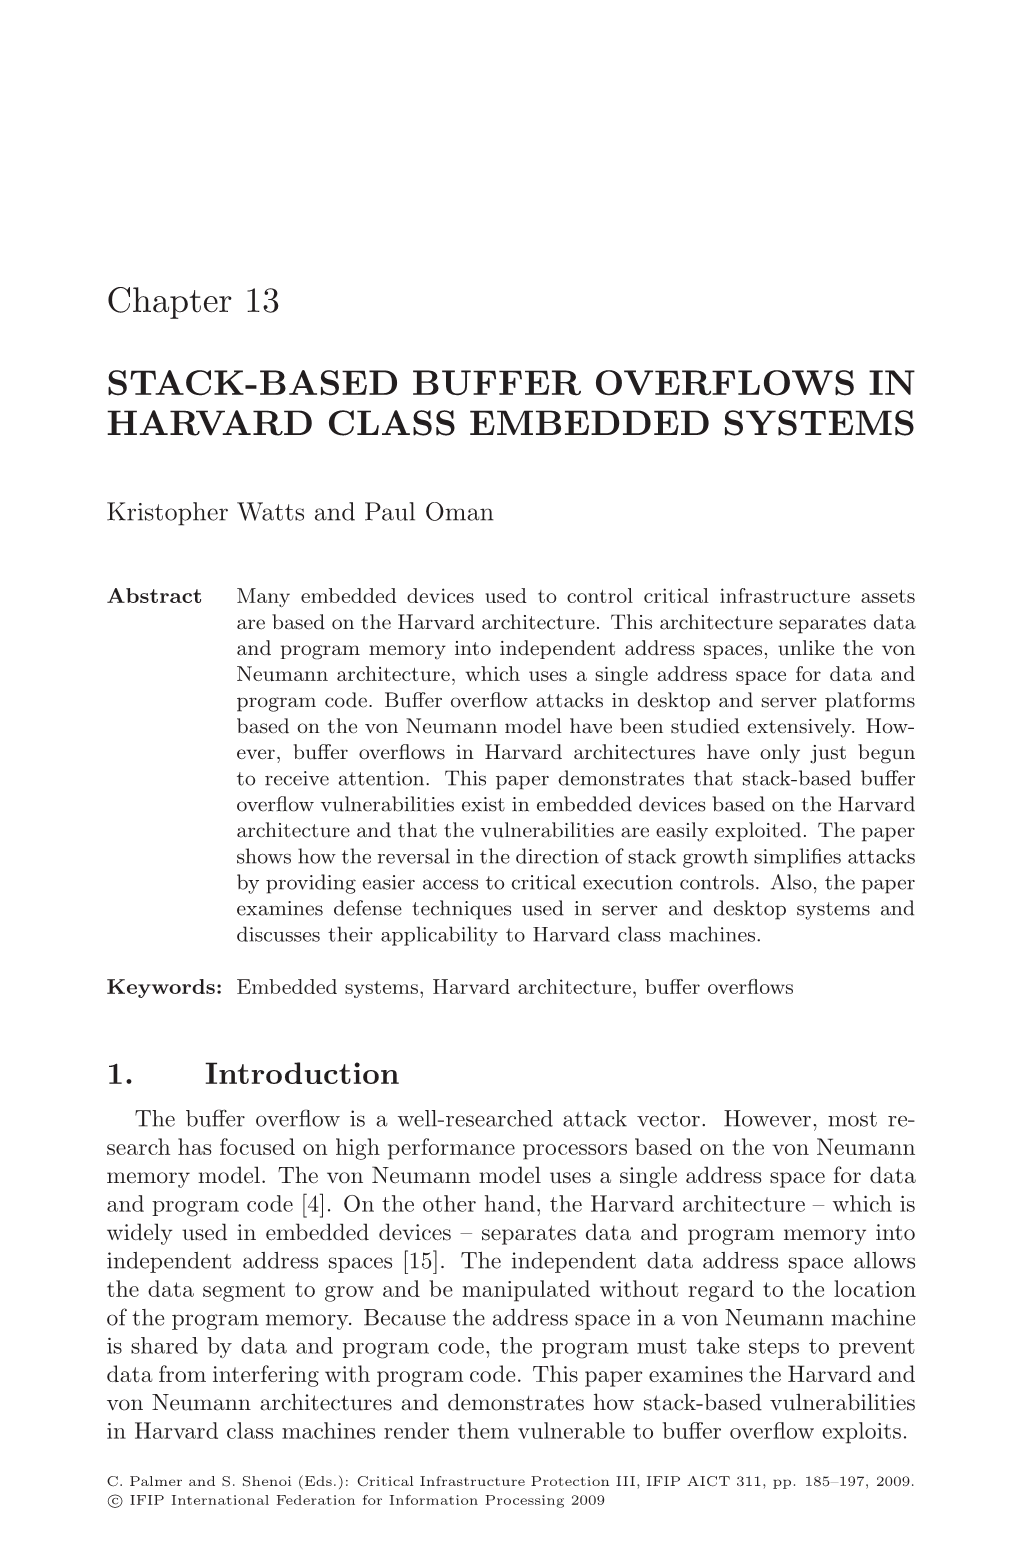 Stack-Based Buffer Overflows in Harvard Class Embedded Systems